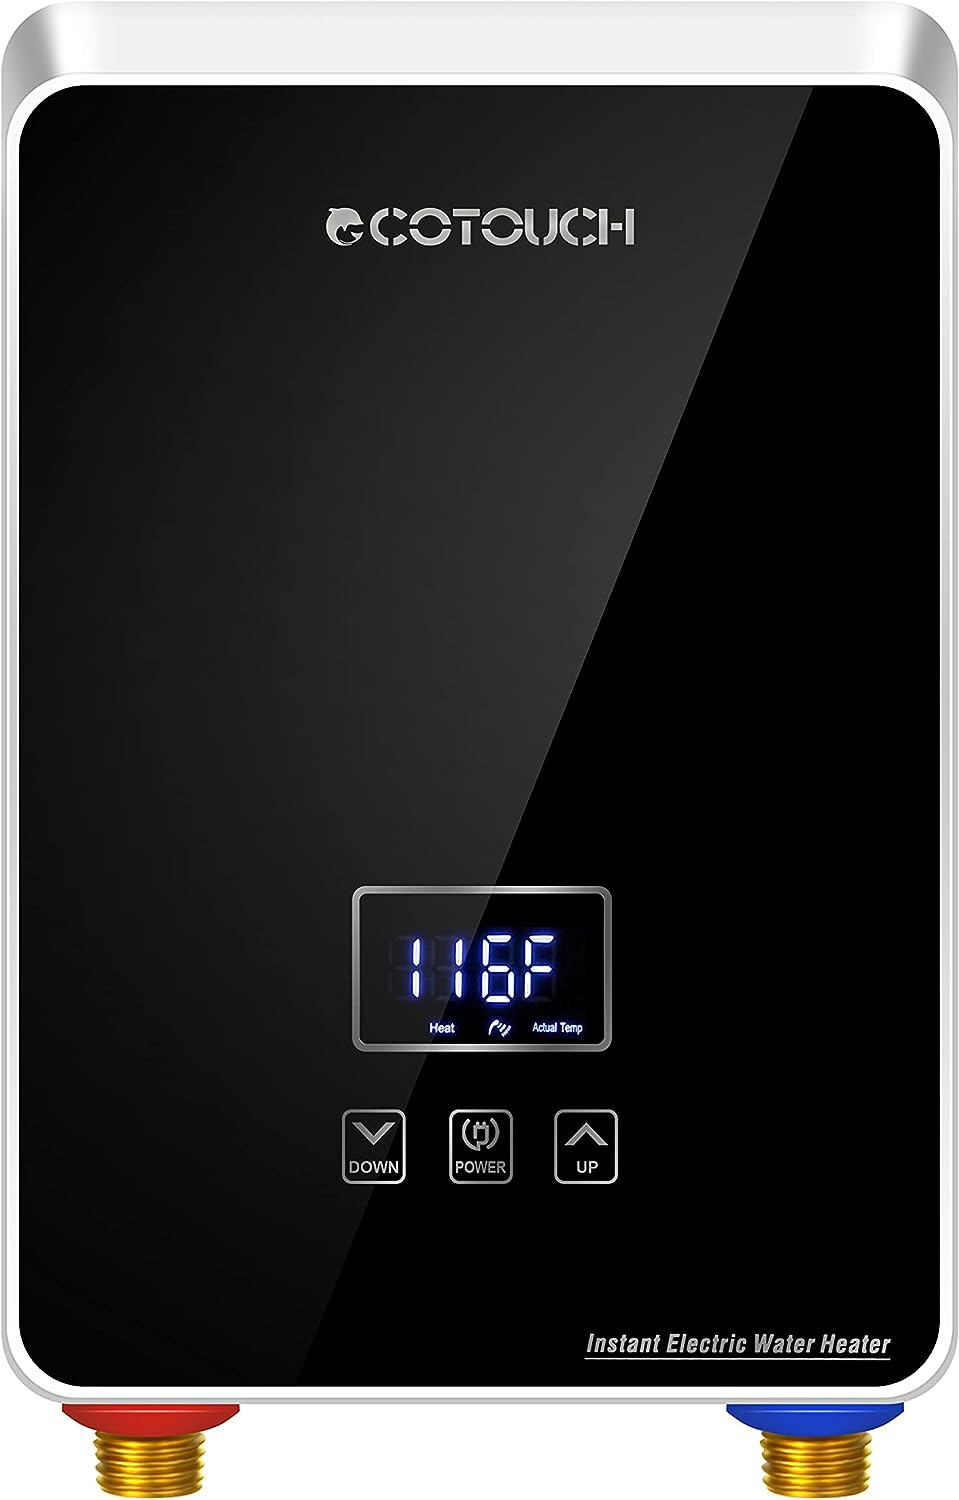 Tankless Water Heater Electric 6.5kw 240V, ECOTOUCH [...]